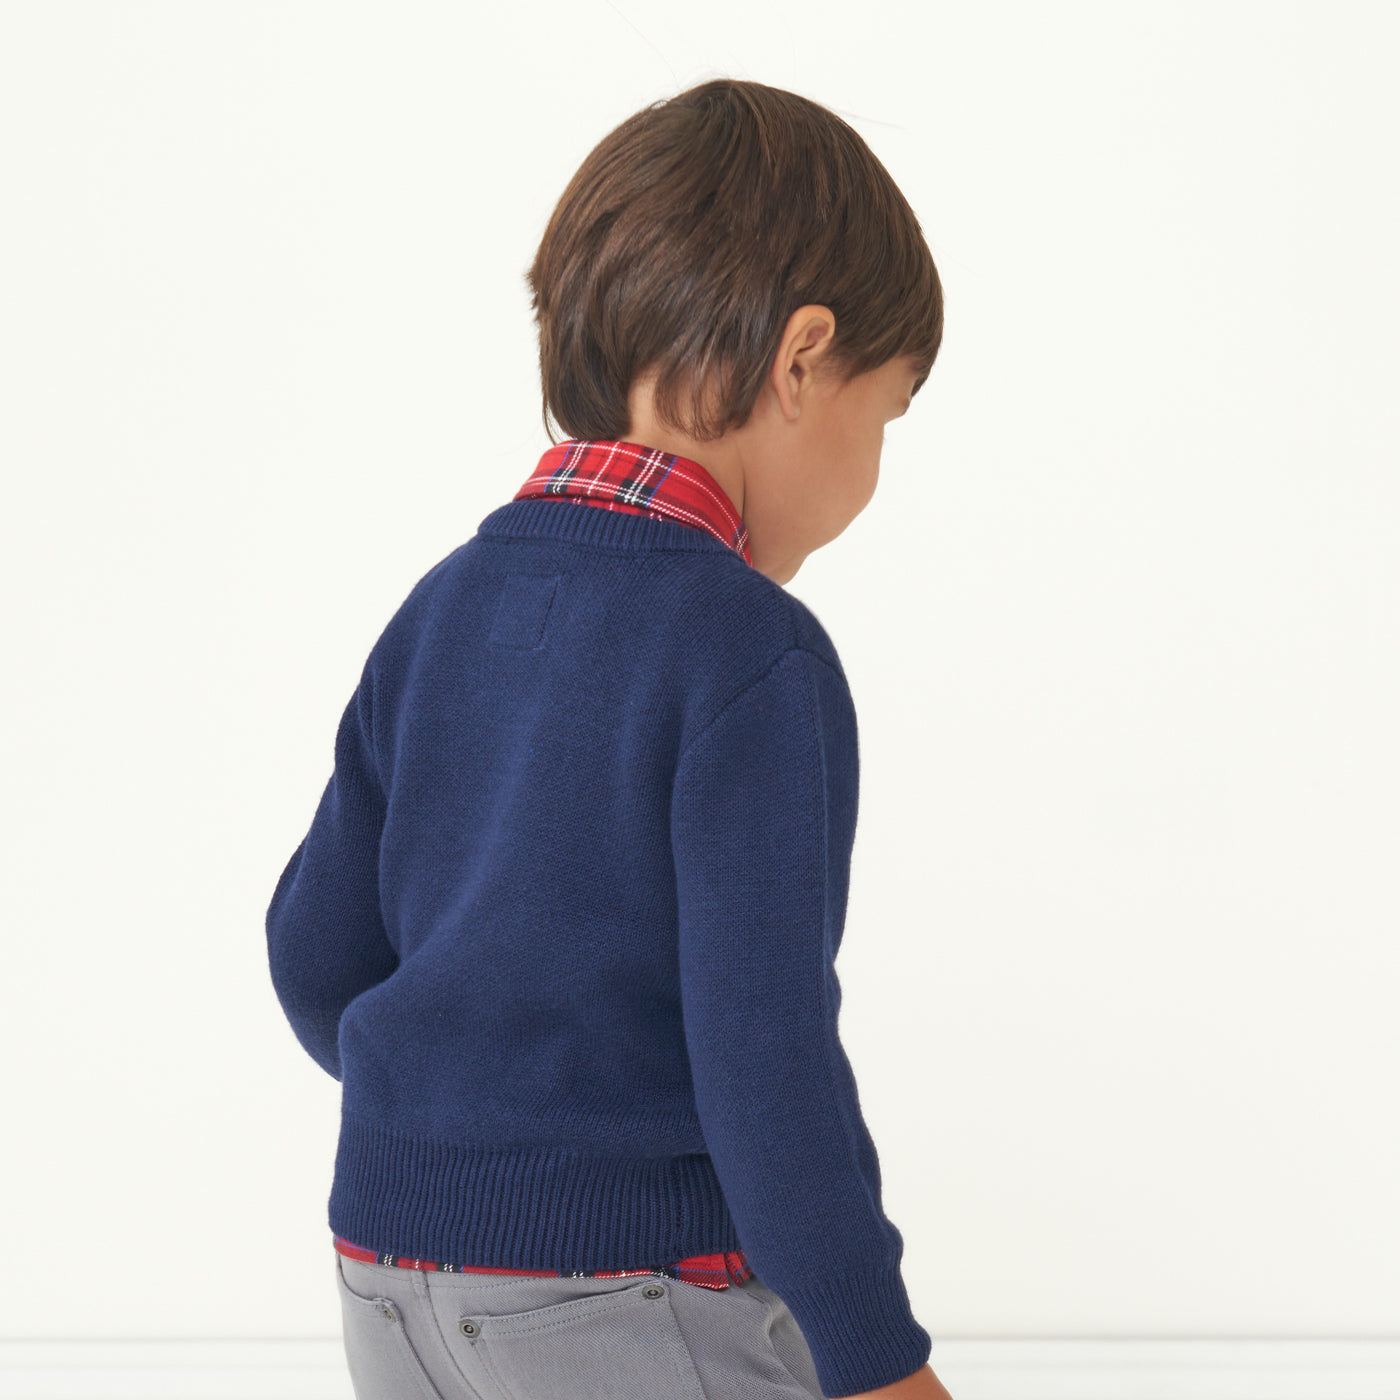 Back view image of a child wearing a Classic Navy knit sweater and coordinating Holiday Plaid polo shirt